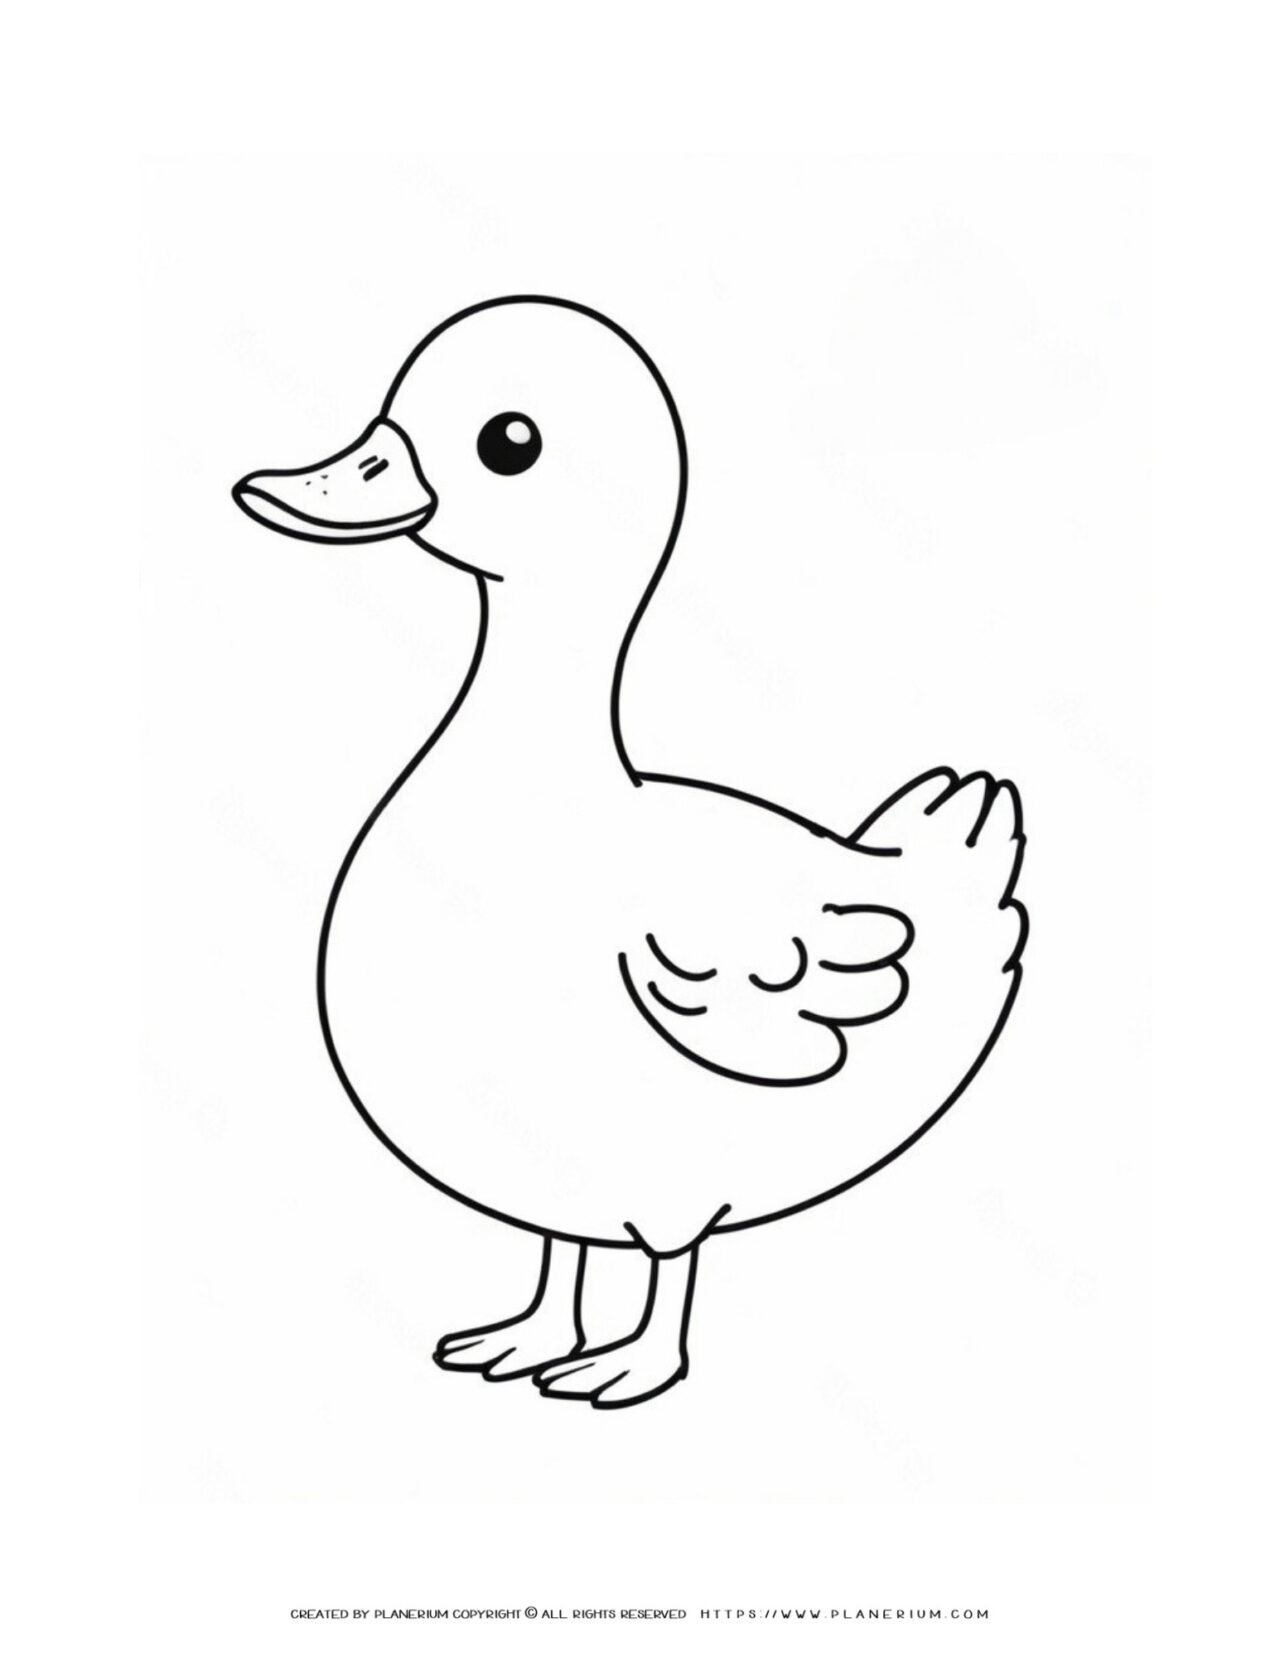 Big-Duck-Outline-Facing-to-the-Left-Simple-Coloring-Page-for-Kids